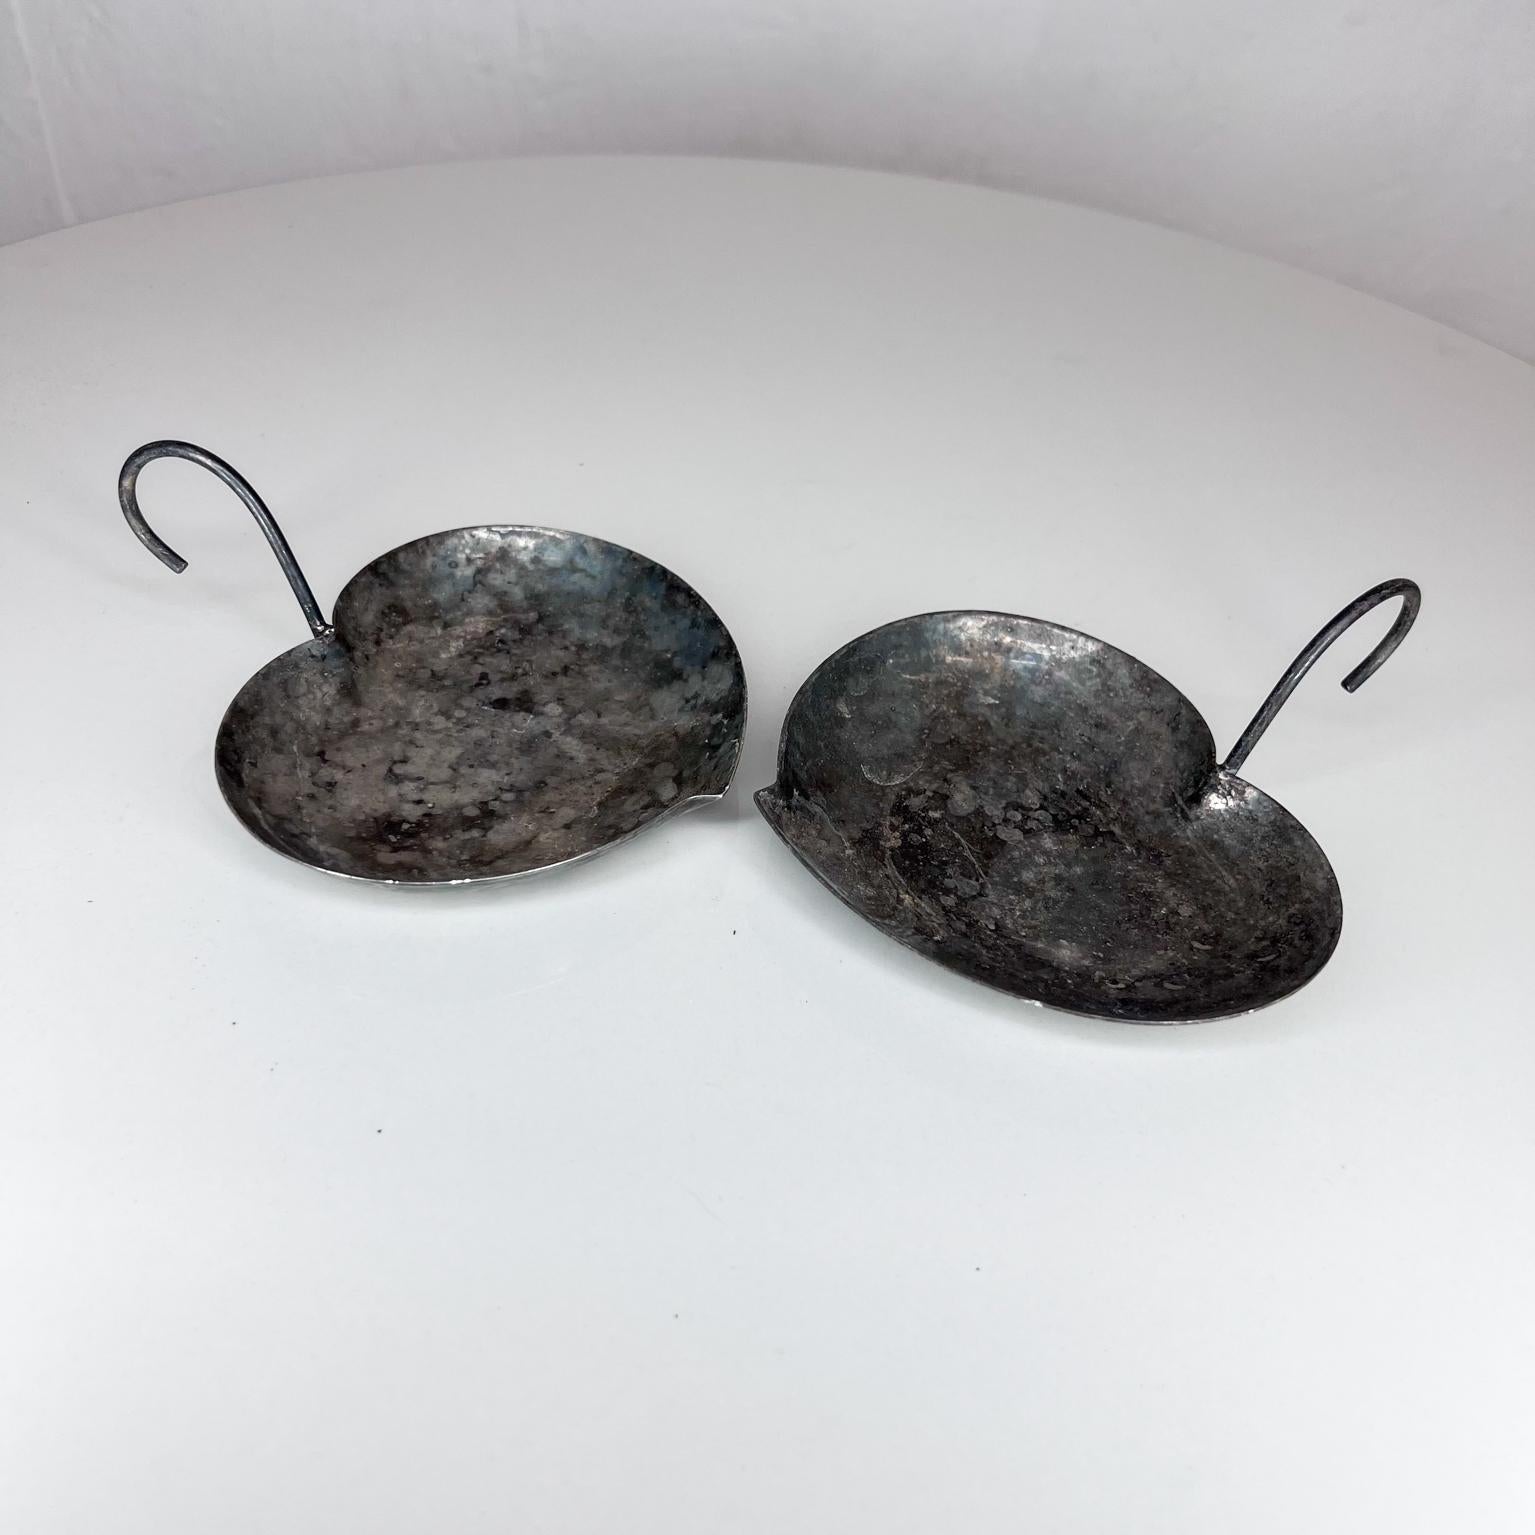 Pretty Modern vintage silverplated serving heart dish with a sculptural handle.
A pair
Unsigned.
Patina present. Preowned unrestored vintage condition.
Refer to images
Measures: 4.75 W x 5.25 D x 2.13 H.